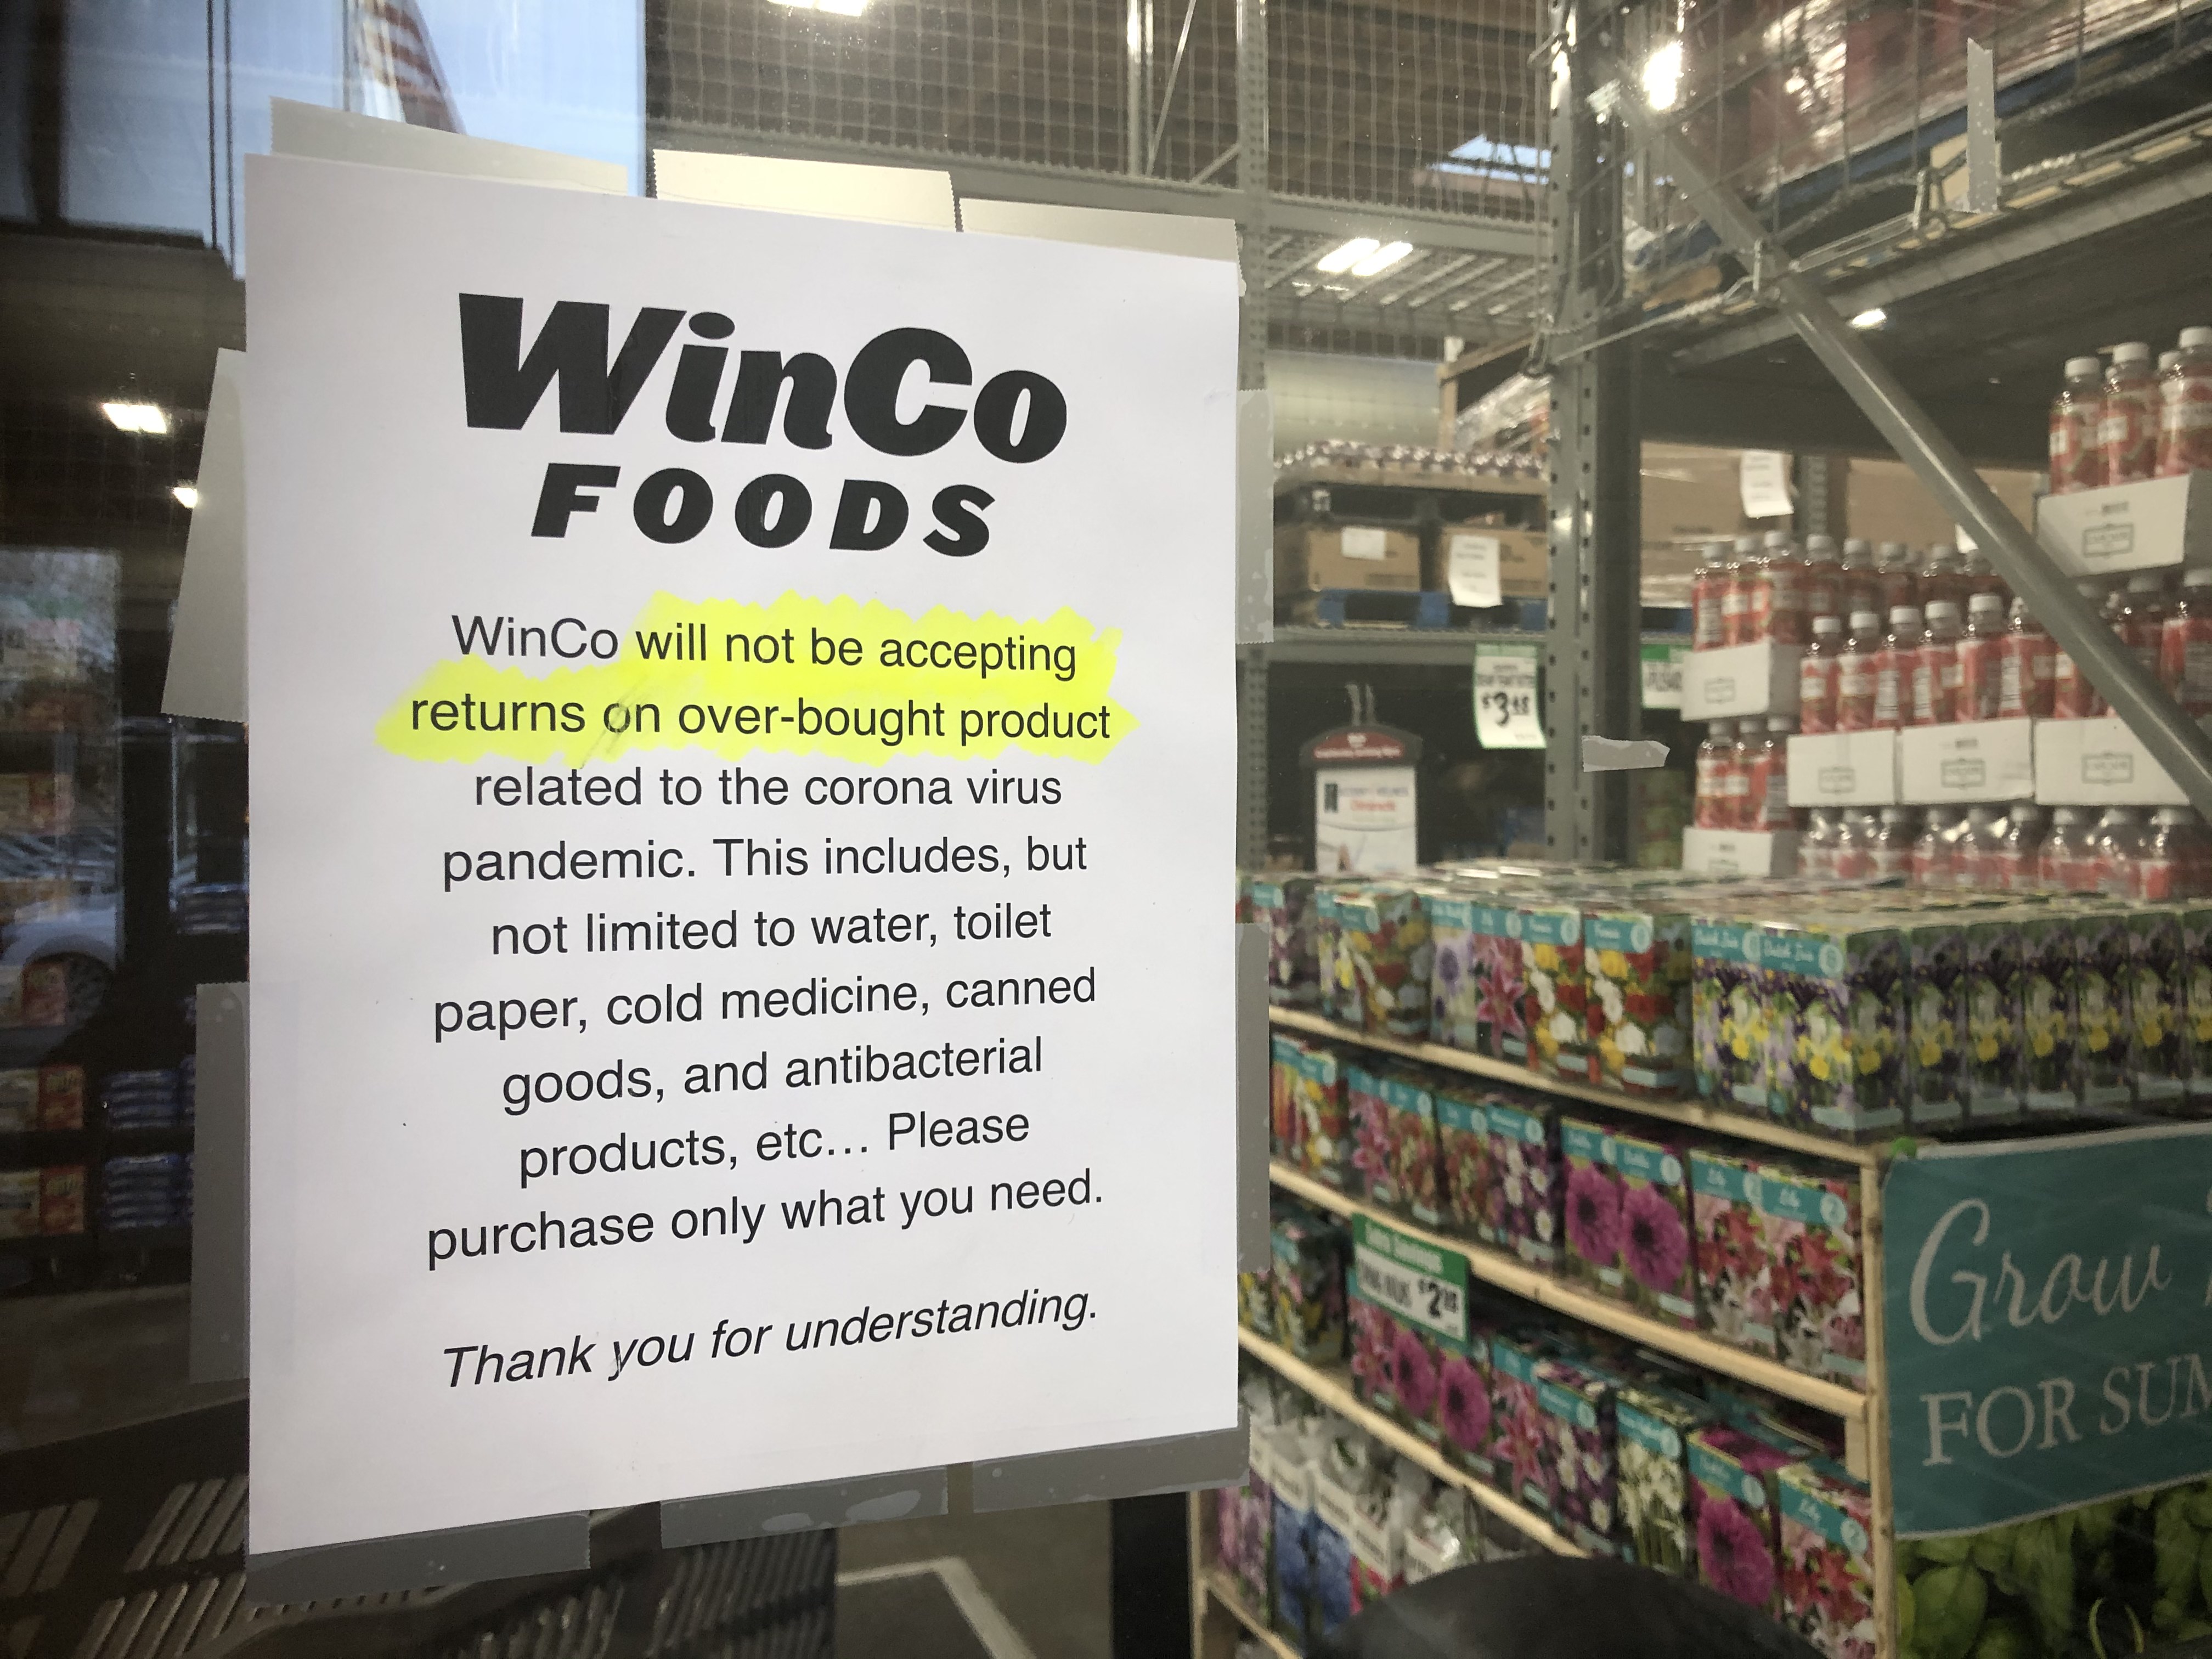 Costco Winco Foods Cut Store Hours As More Portland Area Grocery Stores Adapt To Coronavirus Crisis Oregonlive Com